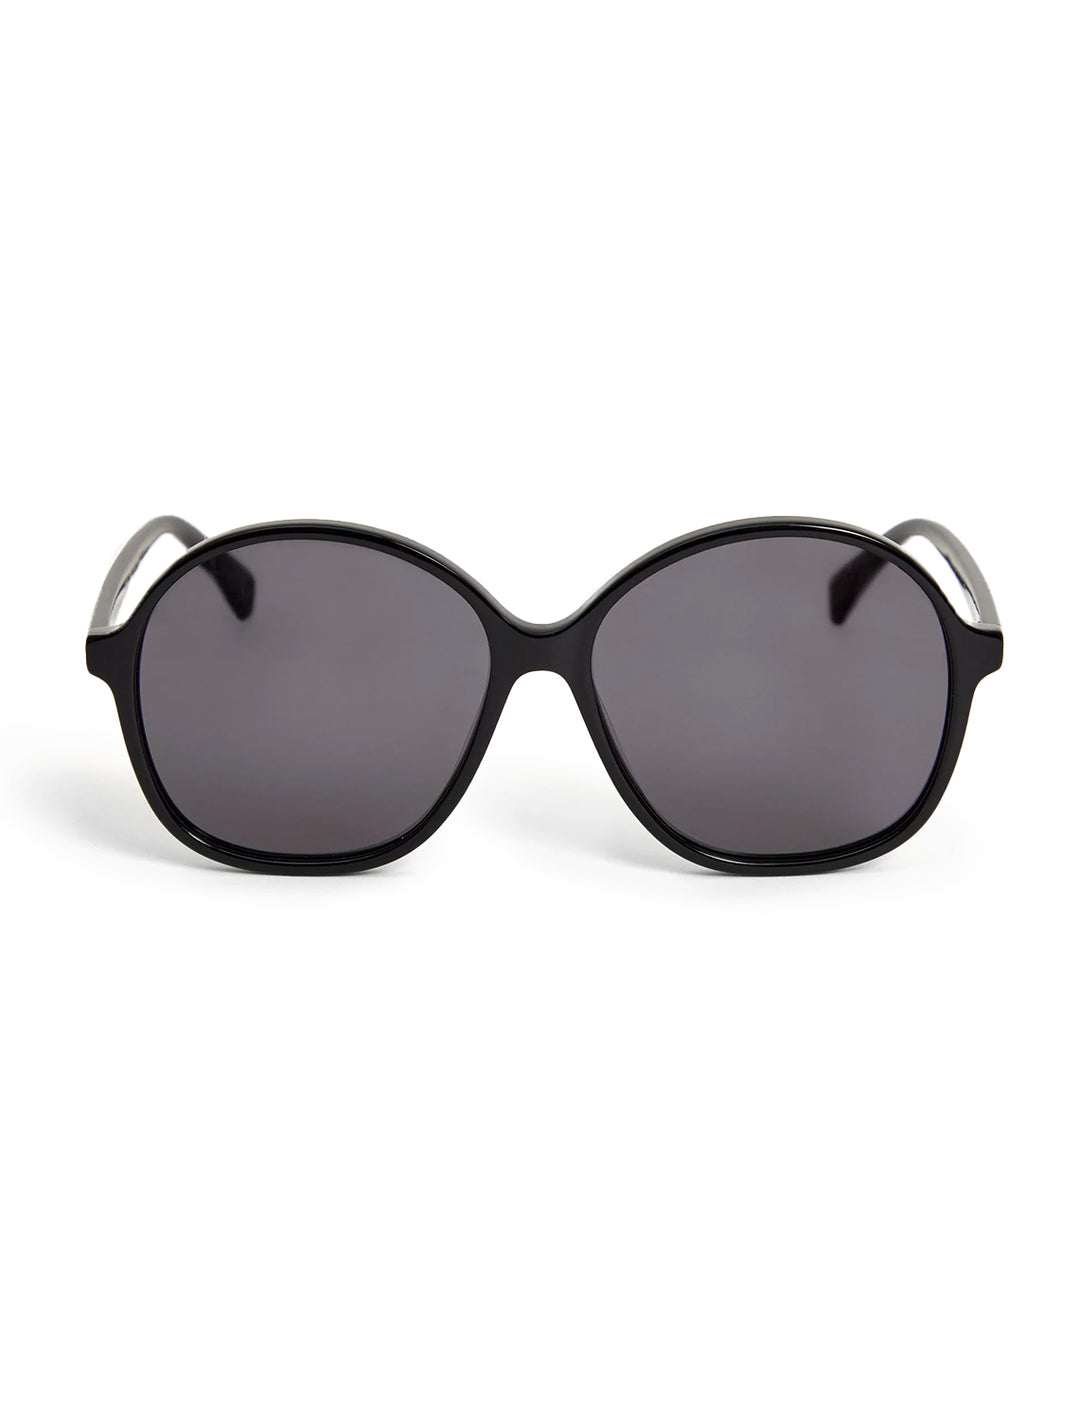 Front view of Clare V.'s jane sunglasses in black.